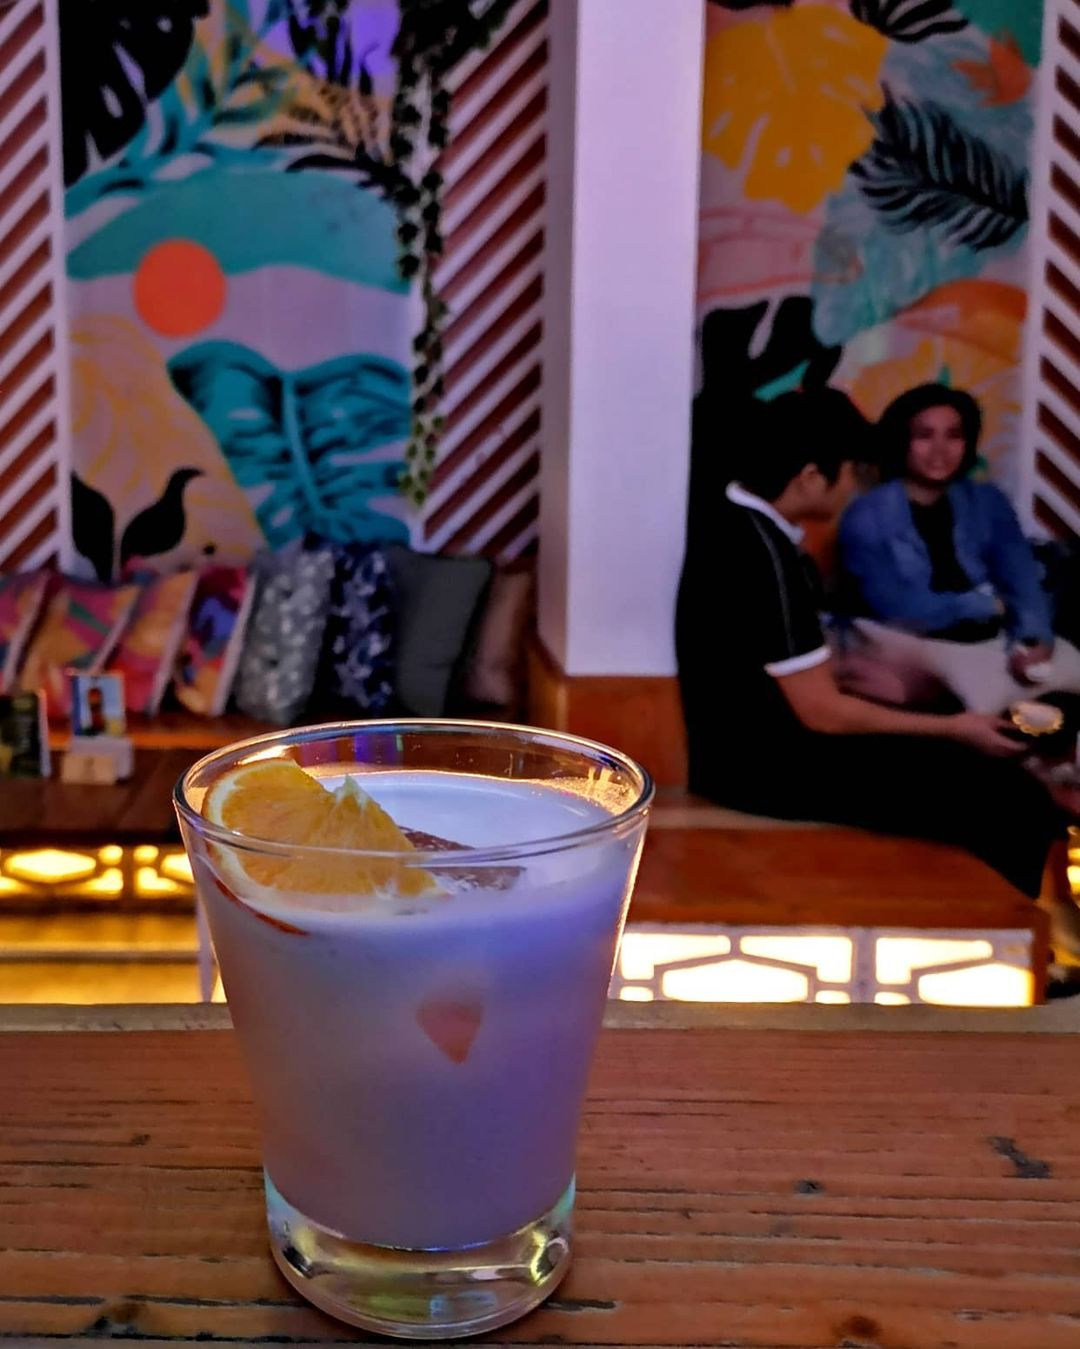 A glass of Tortuga's Coco Crush signature cocktail, a drink made of coconut rum, Amarula, and Bianco. It is garnished with fresh lime and an orange slice. The glass is set on top of an orange-painted bamboo platform on the foreground, with Tortuga's beach-themed interior serving as the background.